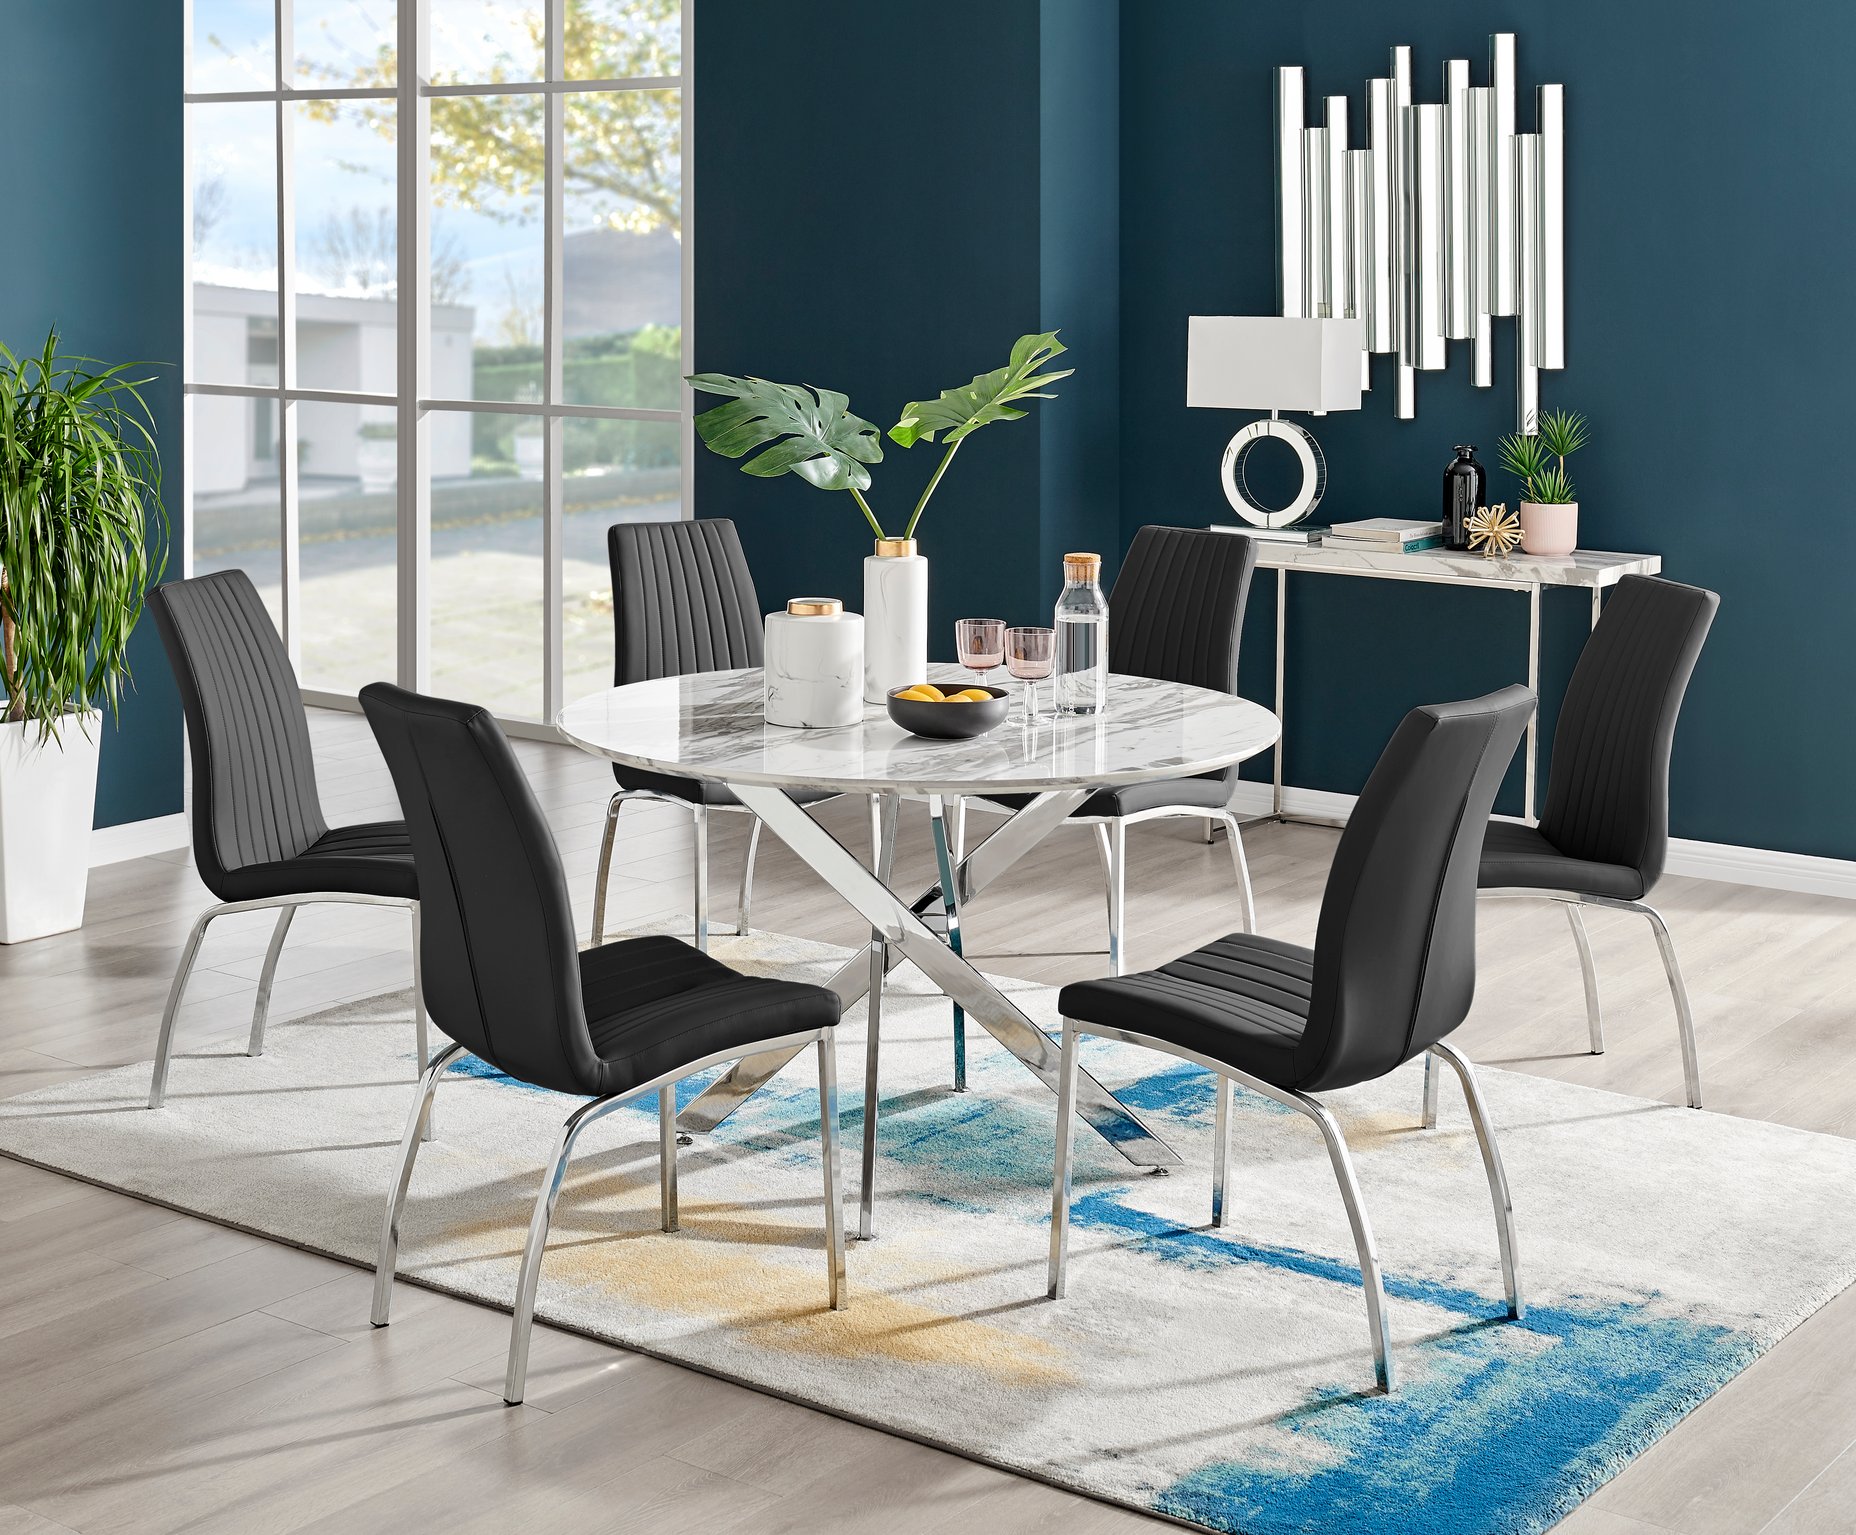 Novara White Marble Round Dining Table 120cm and 6 Isco Chairs Furniture Set